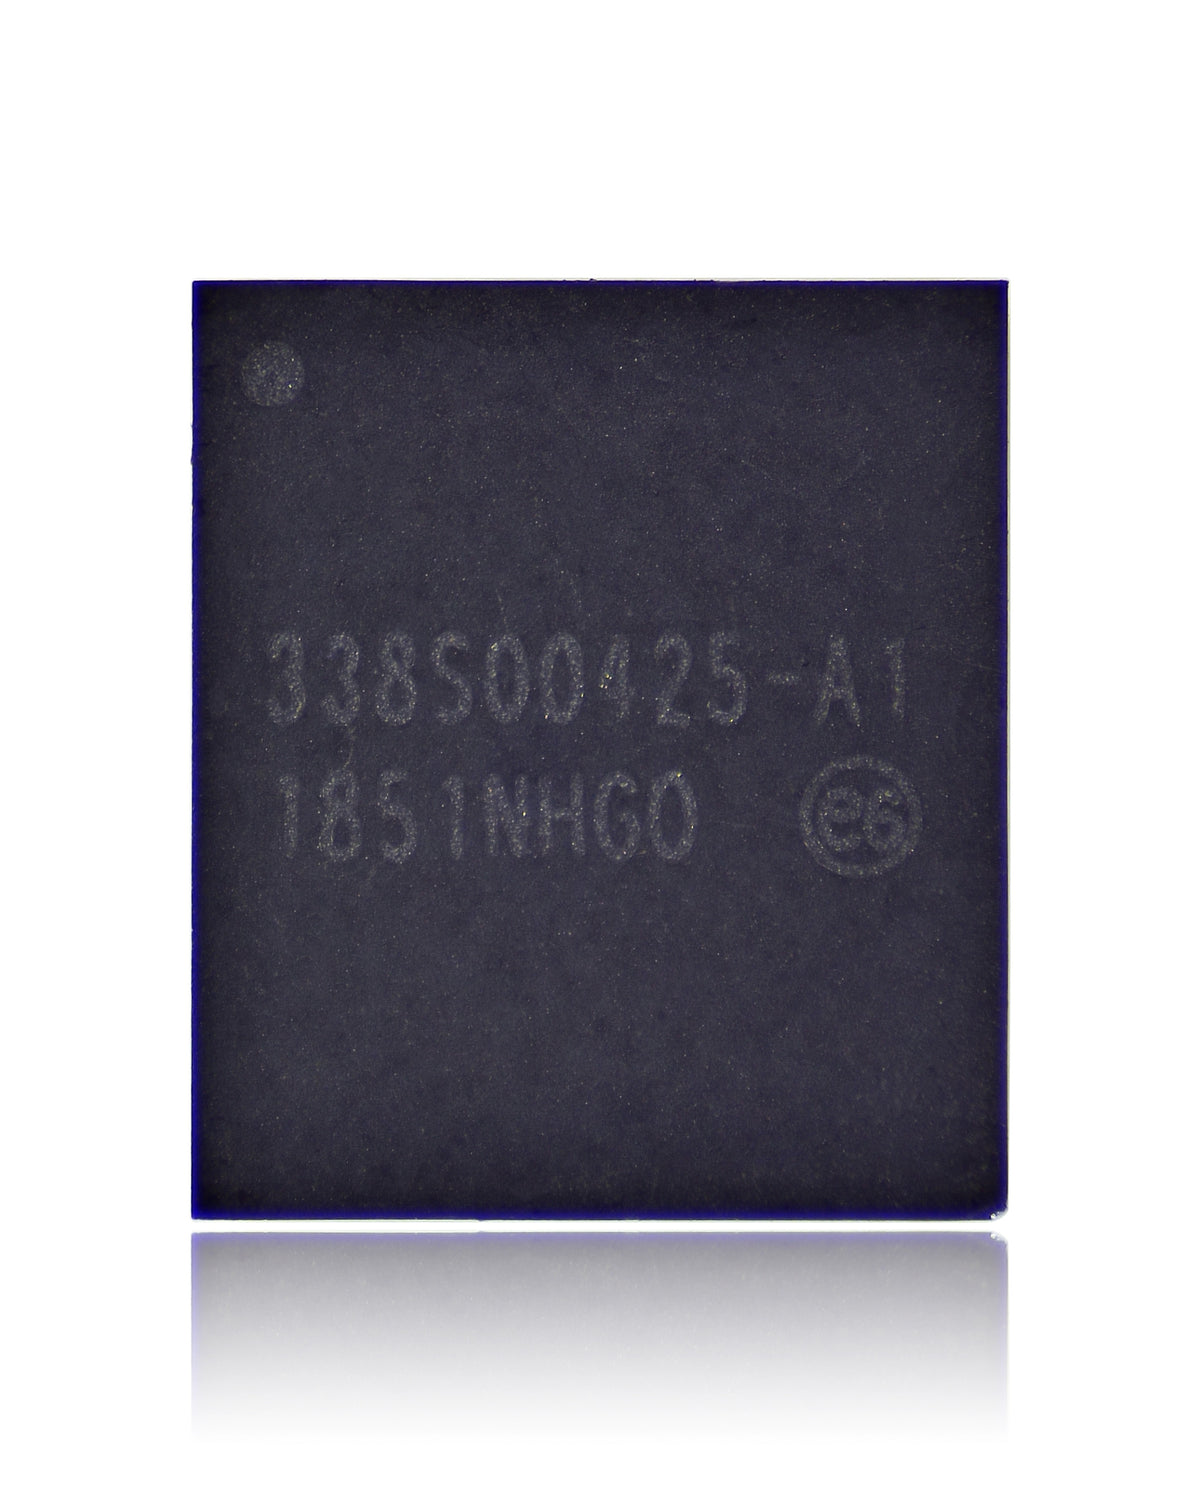 CAMERA POWER MANAGEMENT IC COMPATIBLE WIYH IPHONE XS / XS MAX (338S00425)